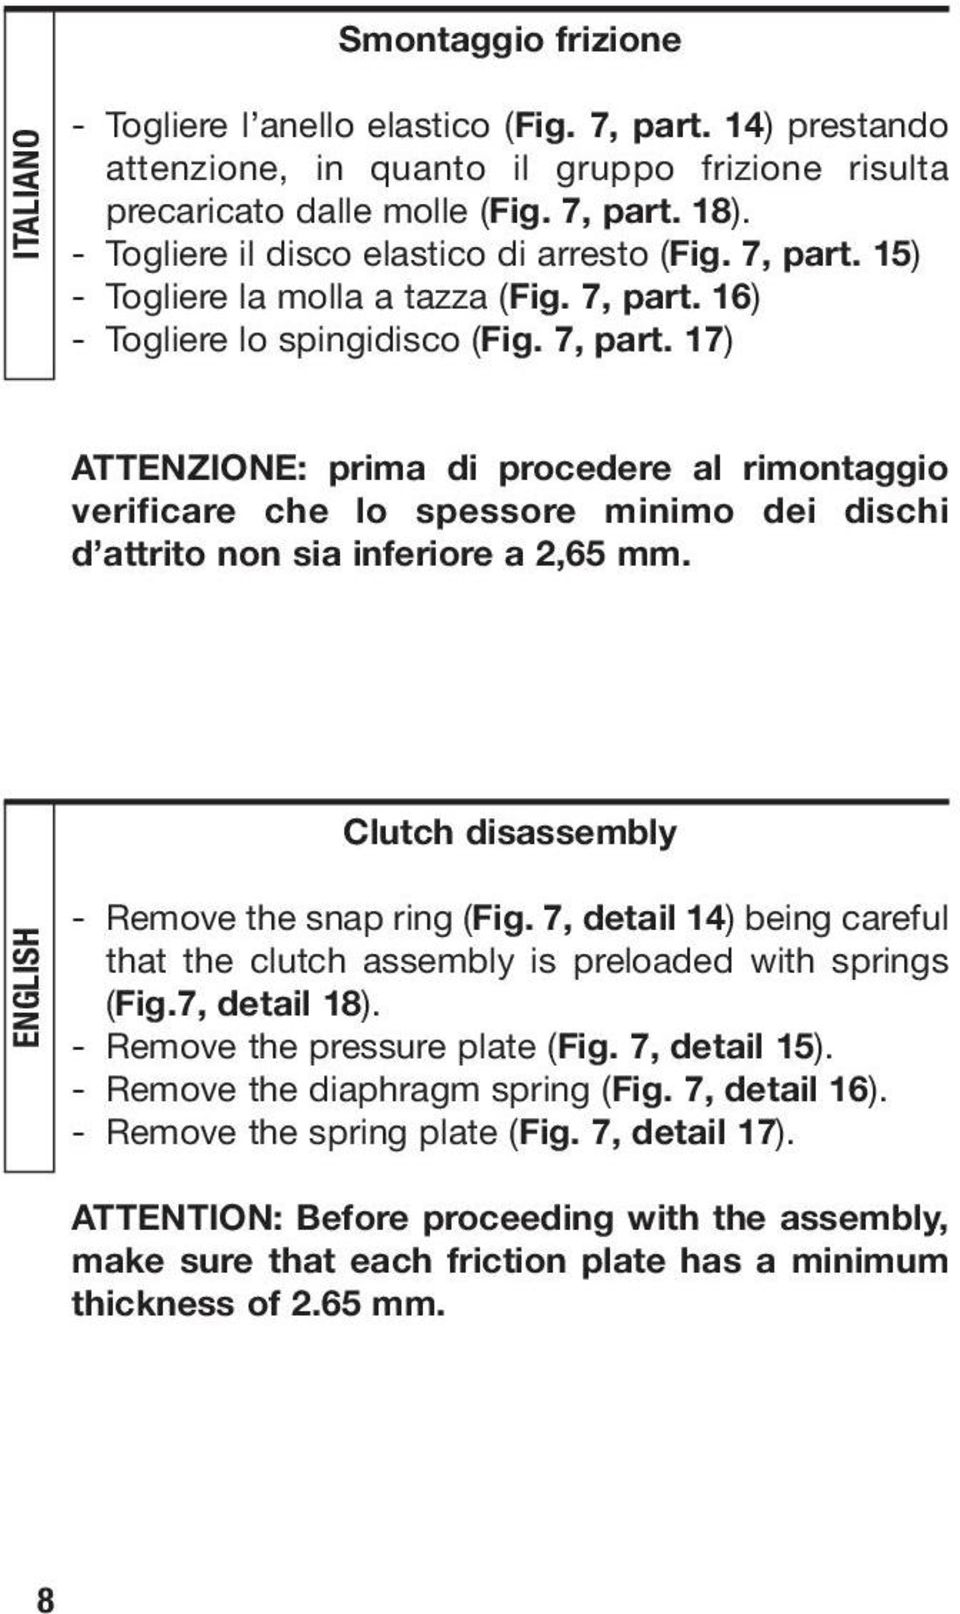 Clutch disassembly ENGLISH - Remove the snap ring (Fig. 7, detail 14) being careful that the clutch assembly is preloaded with springs (Fig.7, detail 18). - Remove the pressure plate (Fig.